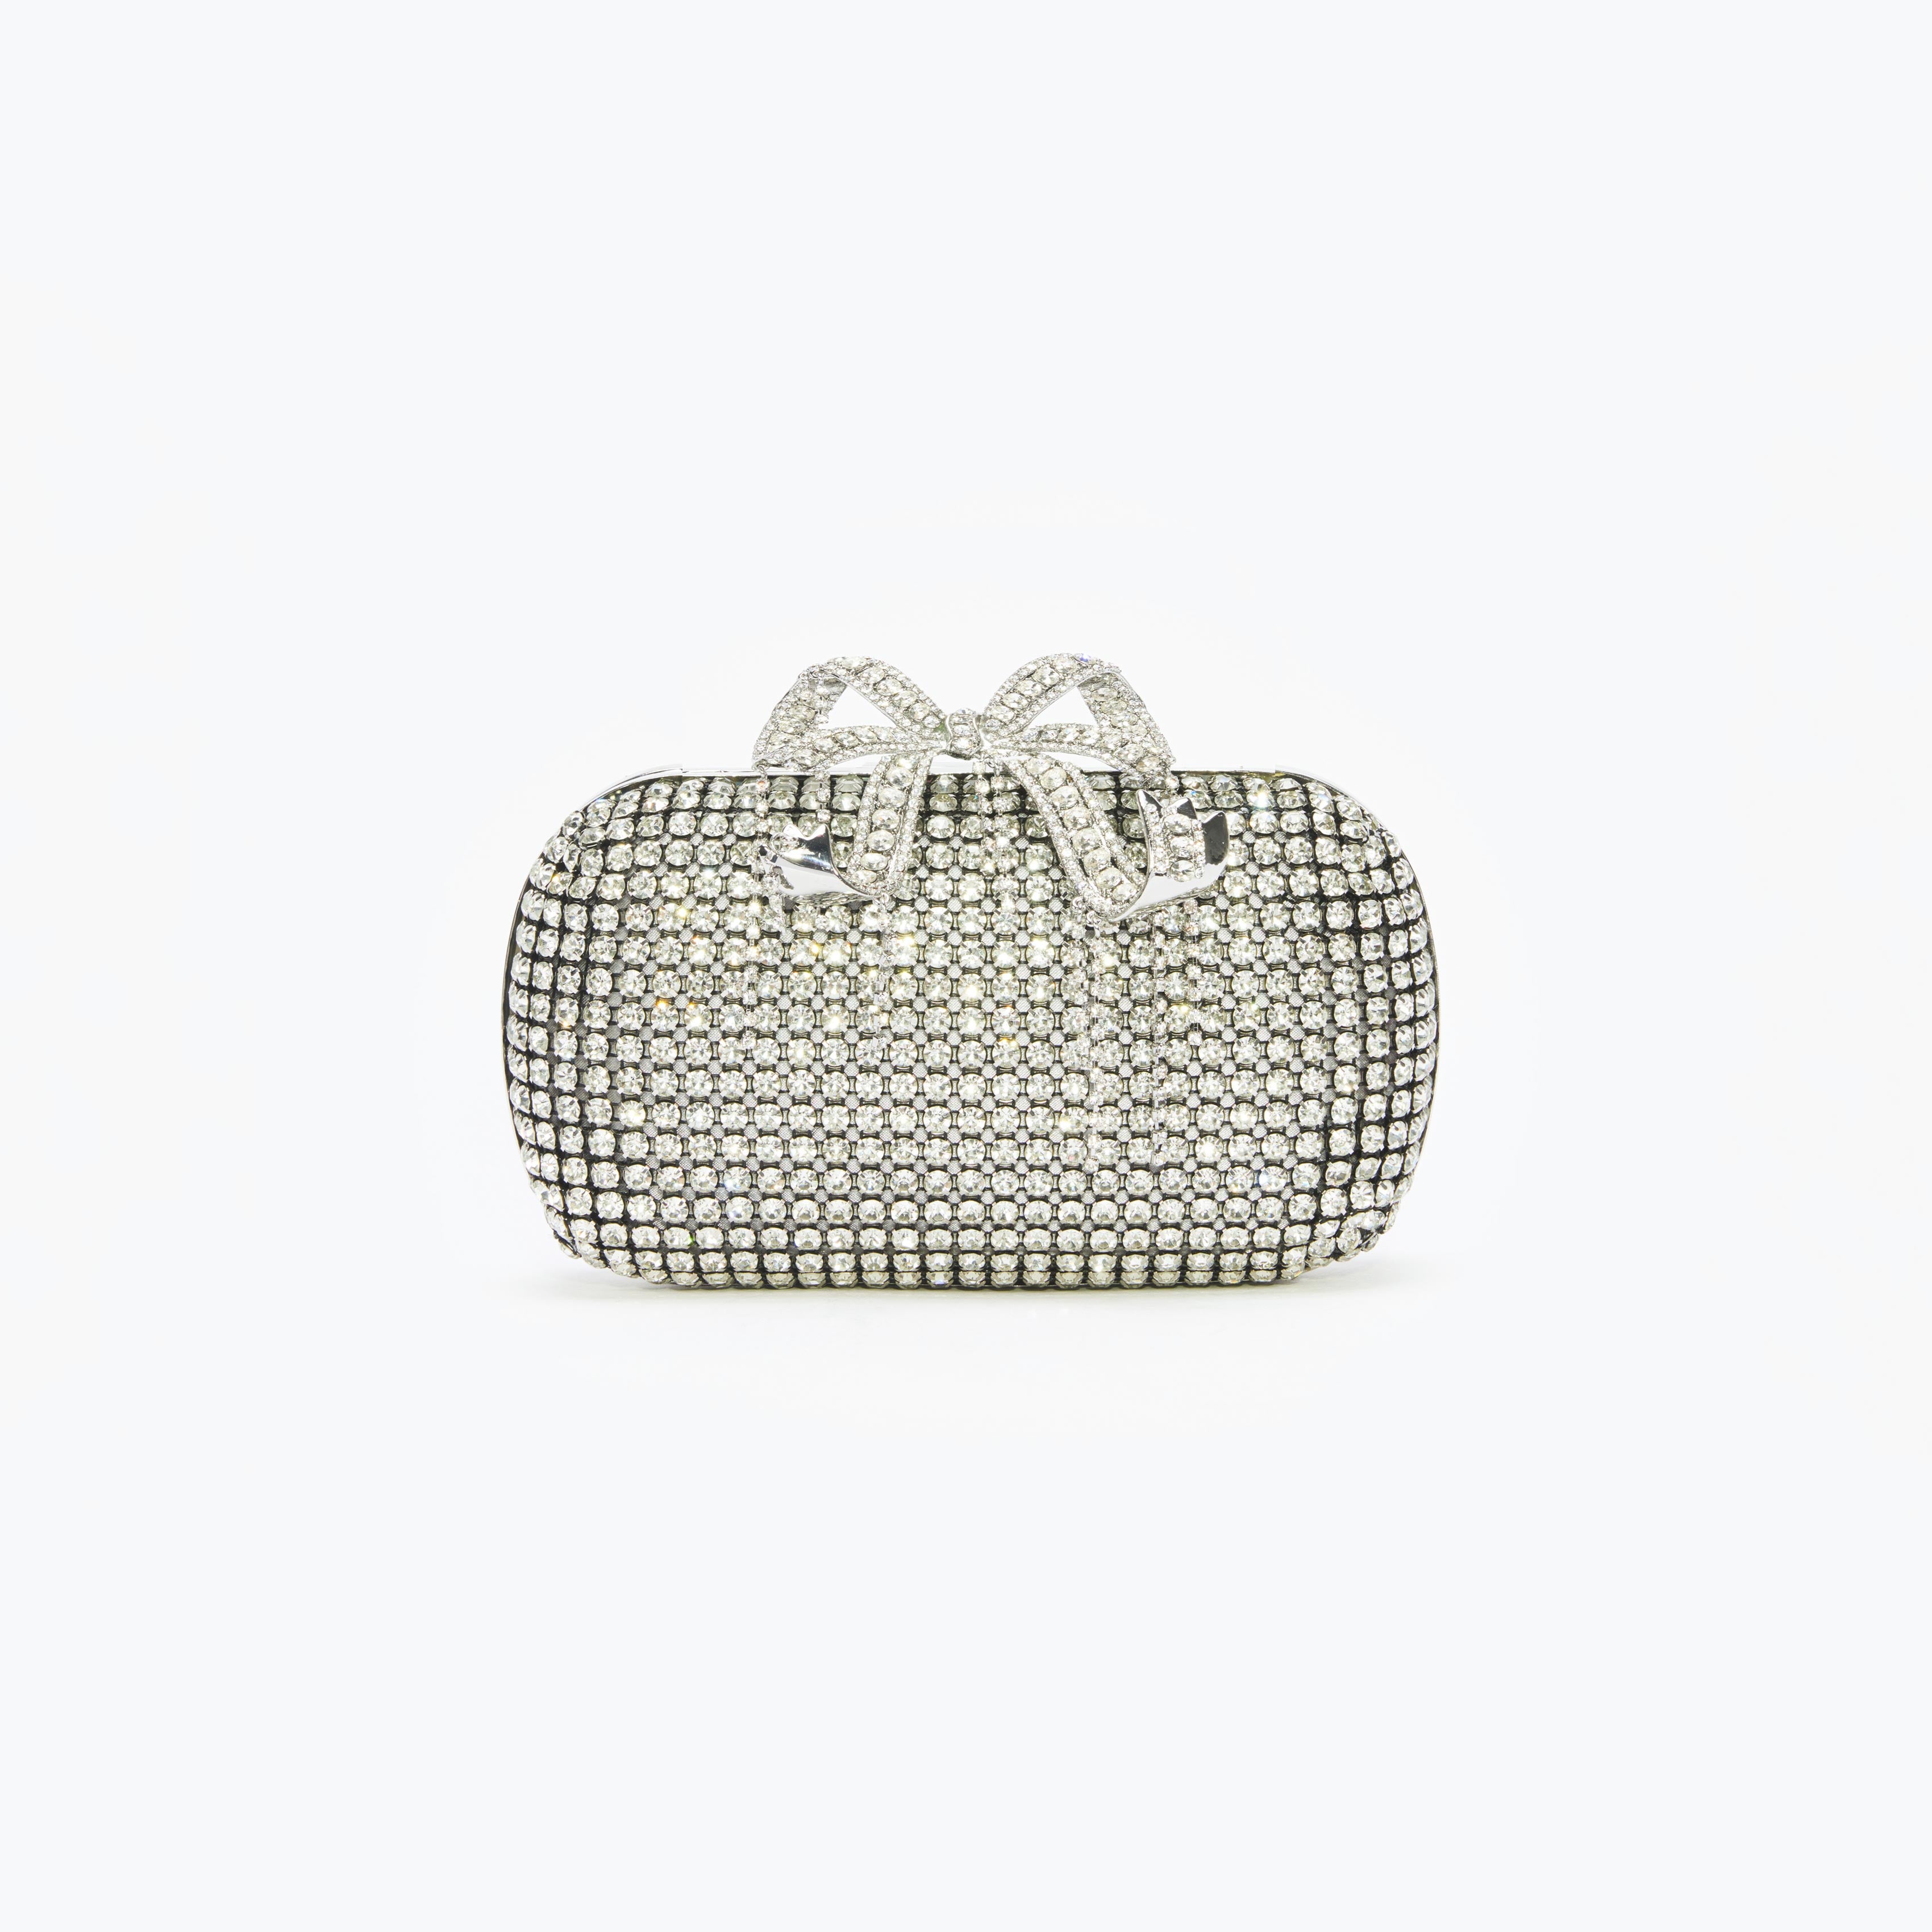 Luxury Glitter Acrylic Evening Clutch Heart Shaped Purse For Women Elegant  And Fashionable Crescent Handbag 230825 From Zhong0003, $36.81 | DHgate.Com